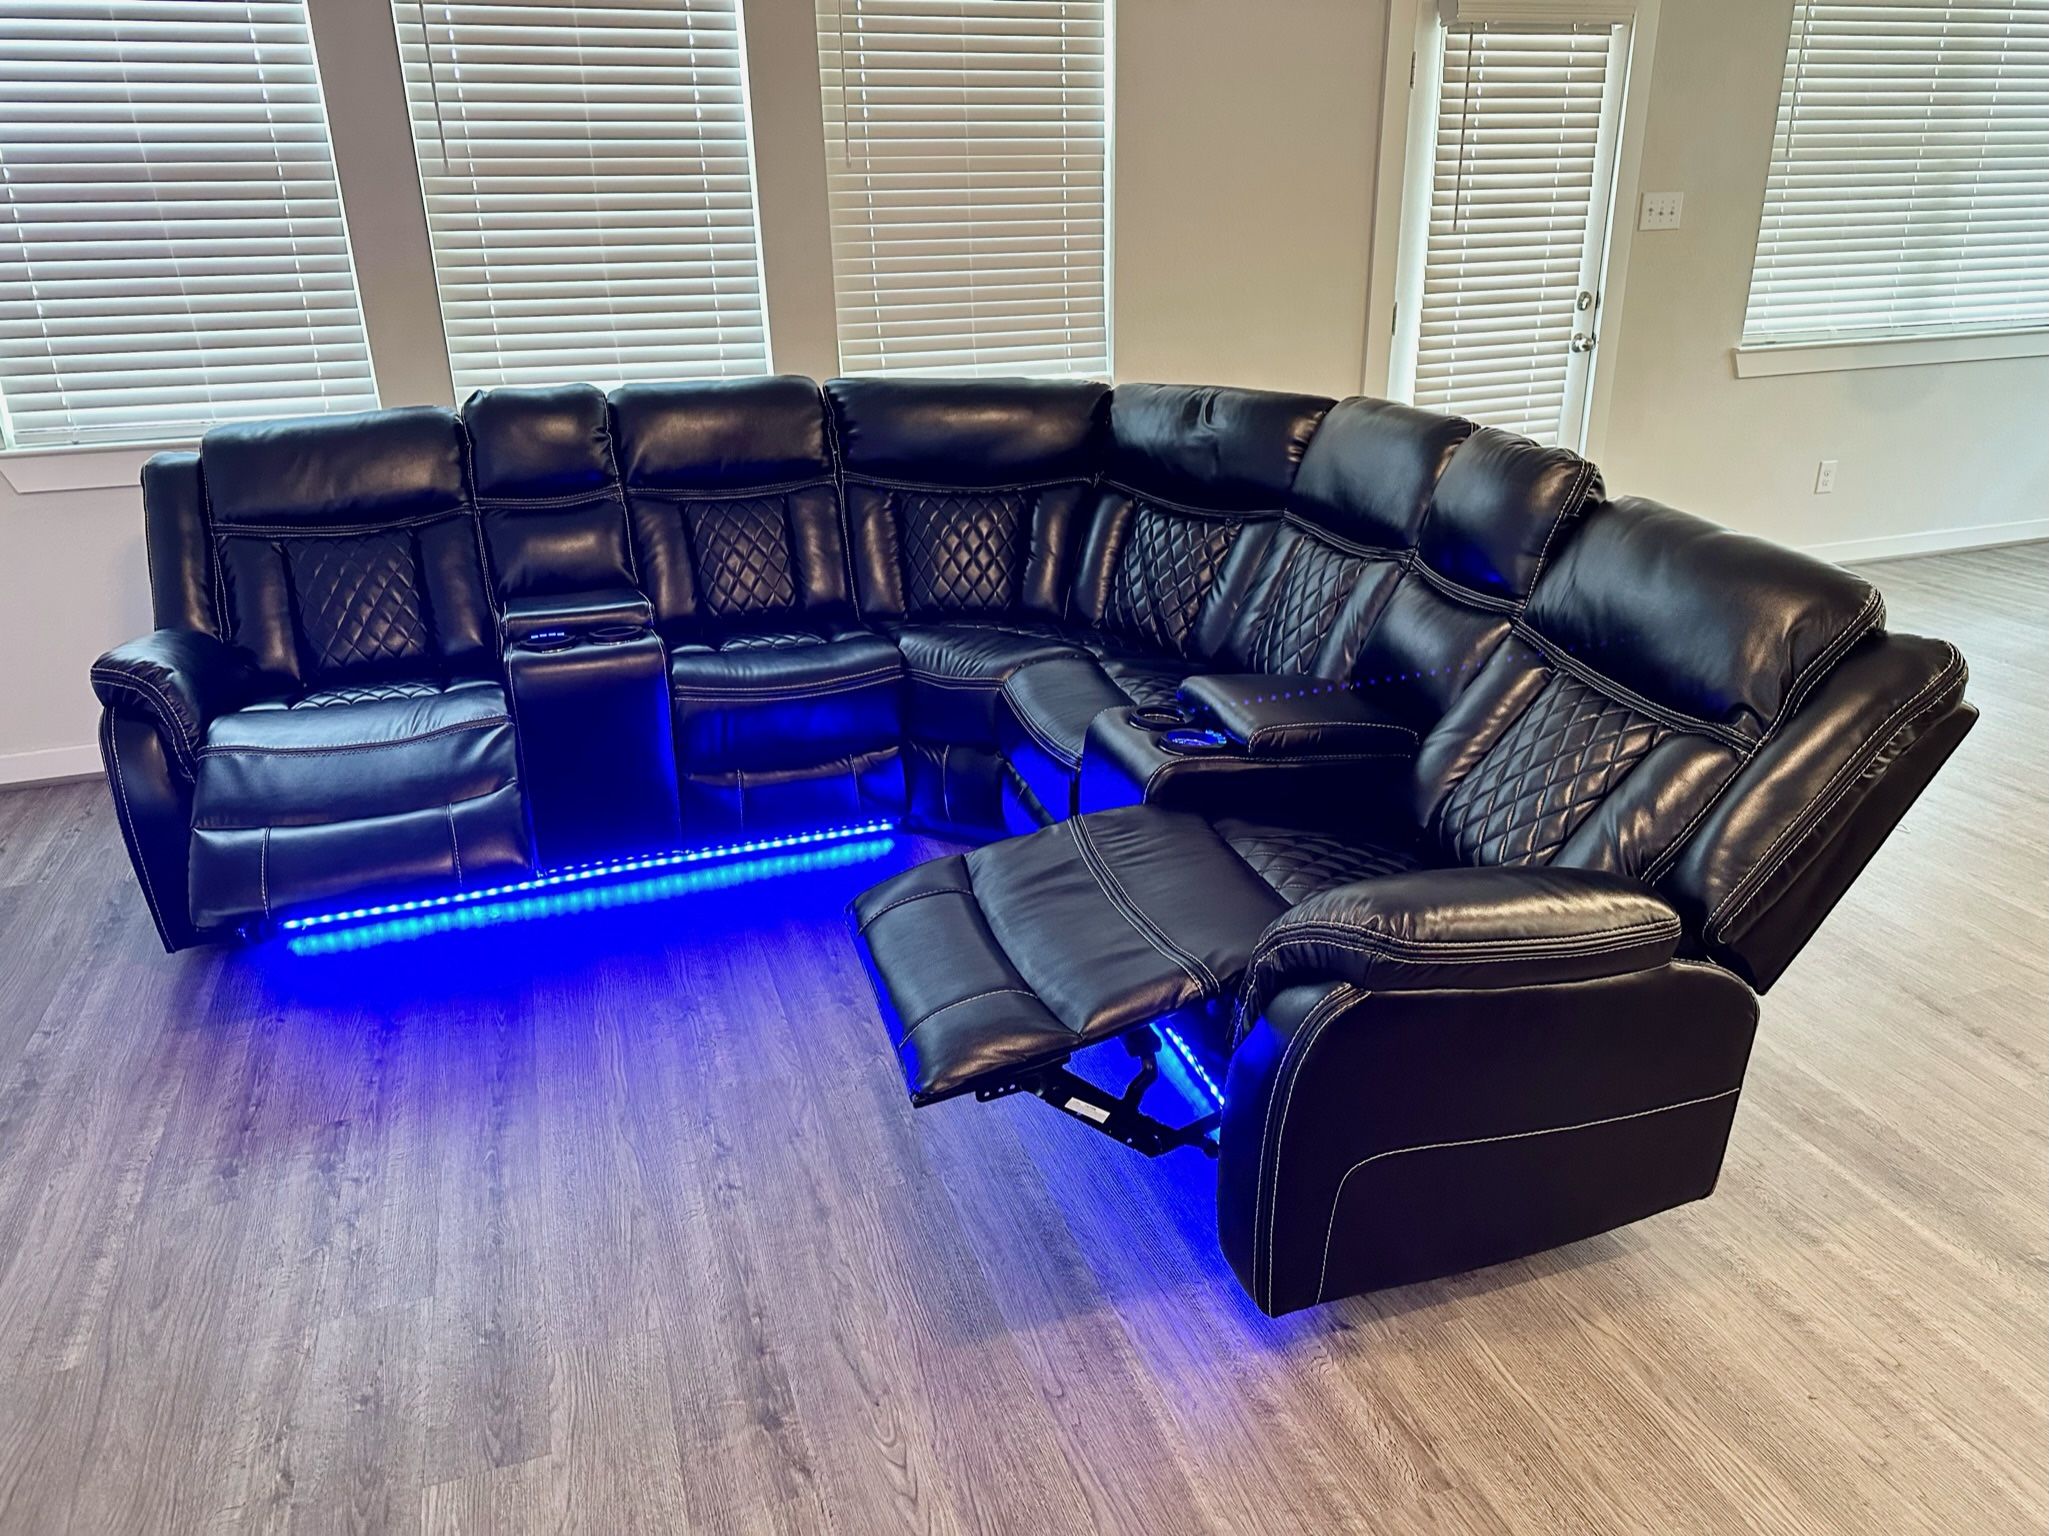 BRAND NEW! Black Reclining Sectional W/ LED Lights And USB Chargers⚡️ Same Day Free Delivery Drop Off ⚡️